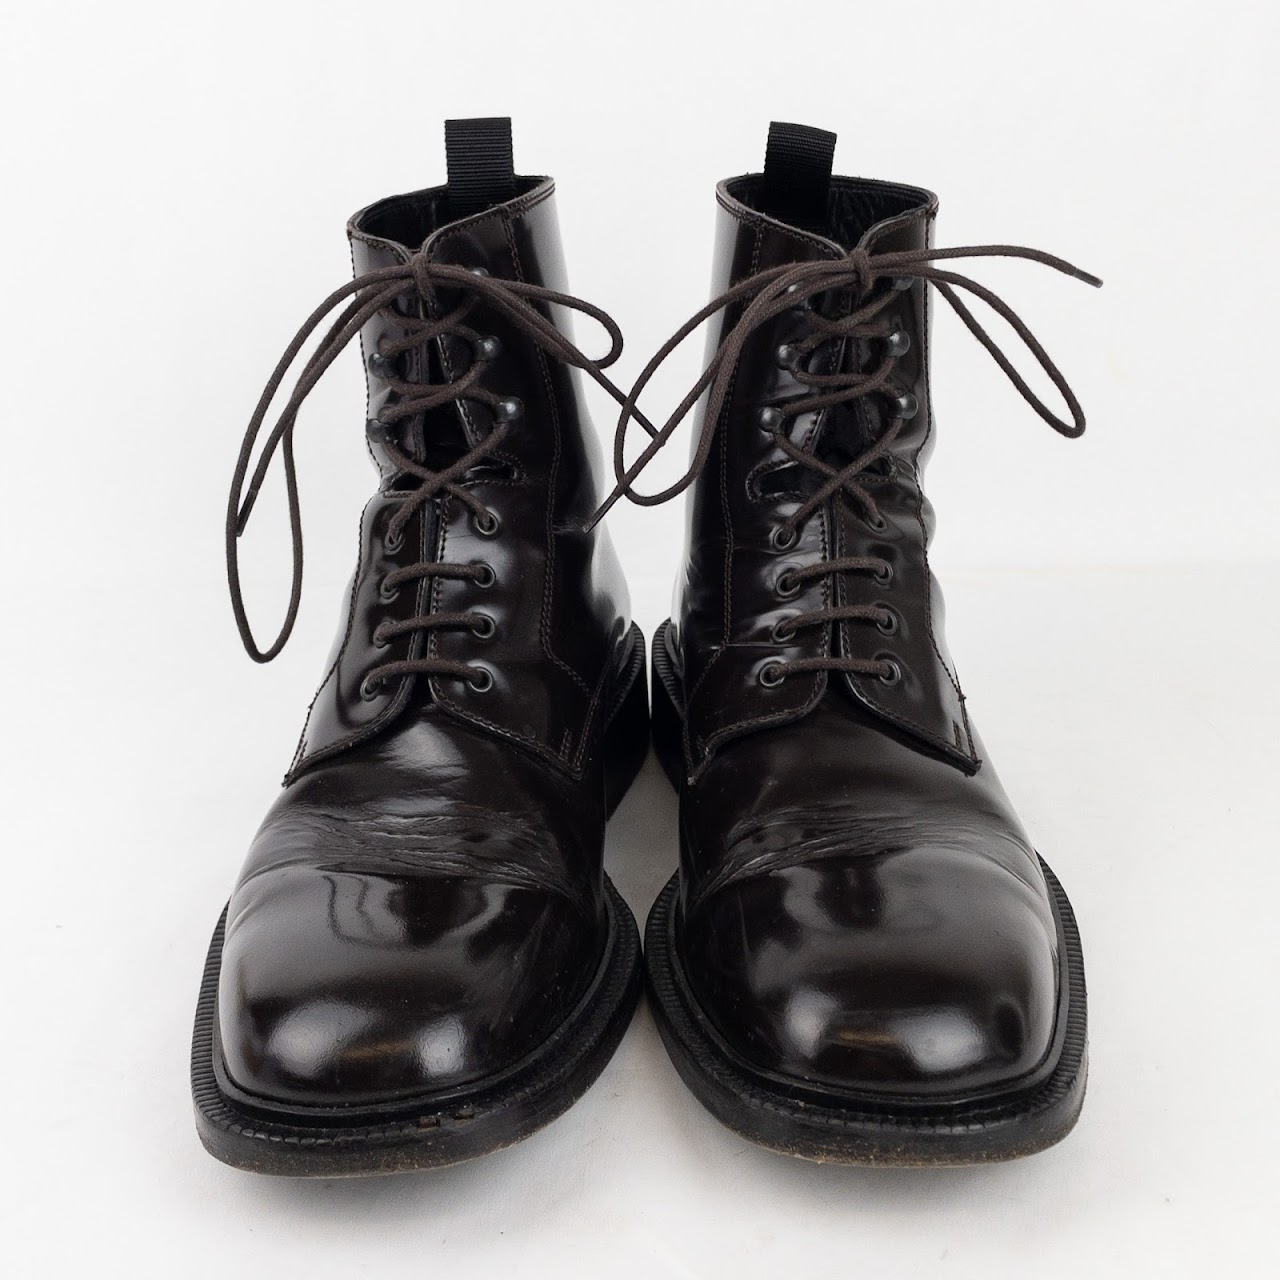 Gucci Lace Up Ankle Boots